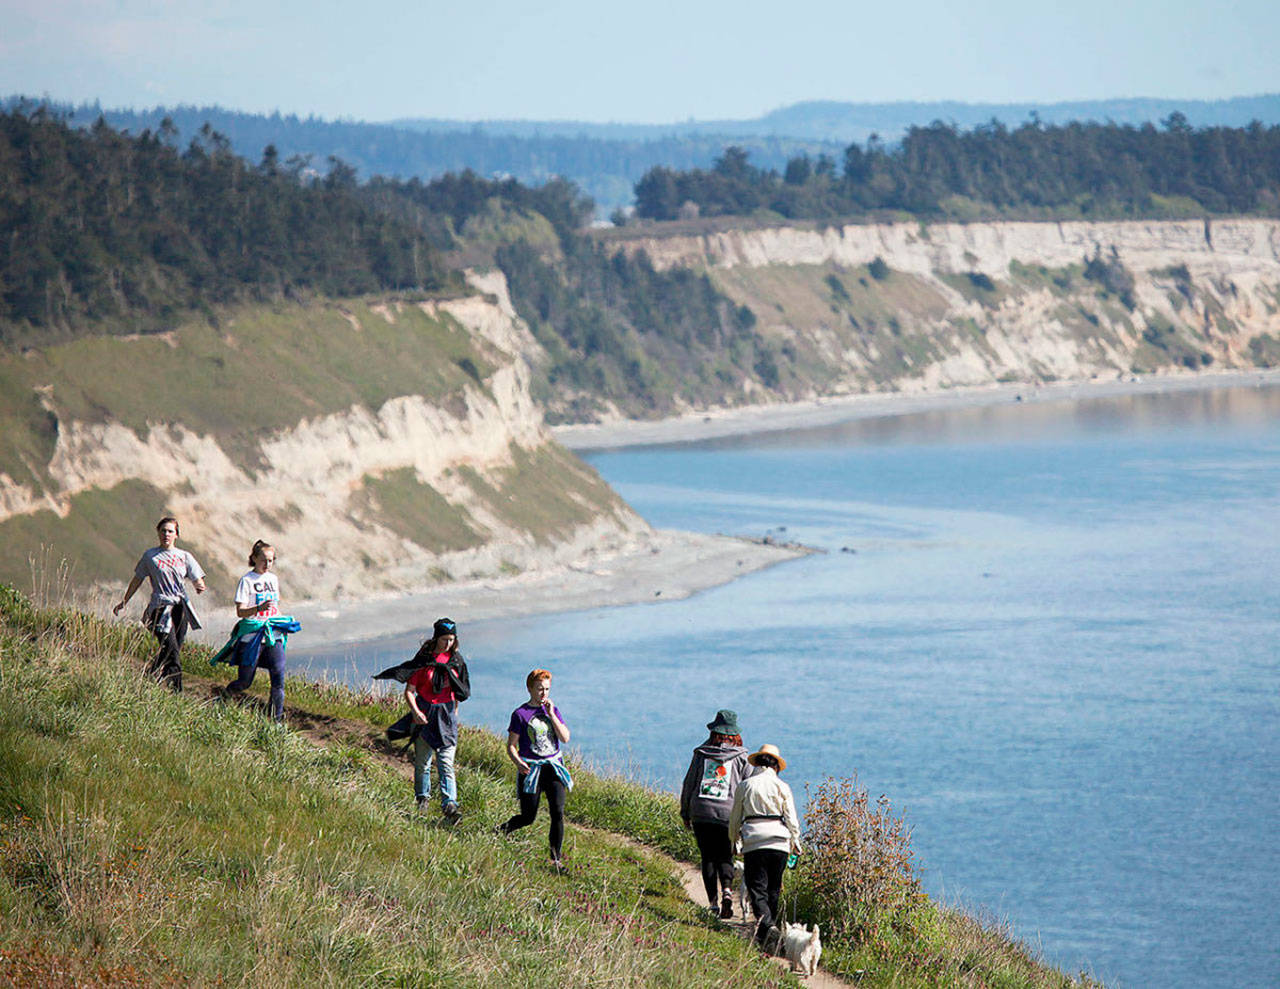 Hikers make their way along the Bluff Trail at Ebey’s Landing near Coupeville on Whidbey Island. At its highest point, the bluff sits about 260 feet above sea level, providing stunning views of the Strait of Juan de Fuca and Olympic Mountains. (Ian Terry | Herald file)